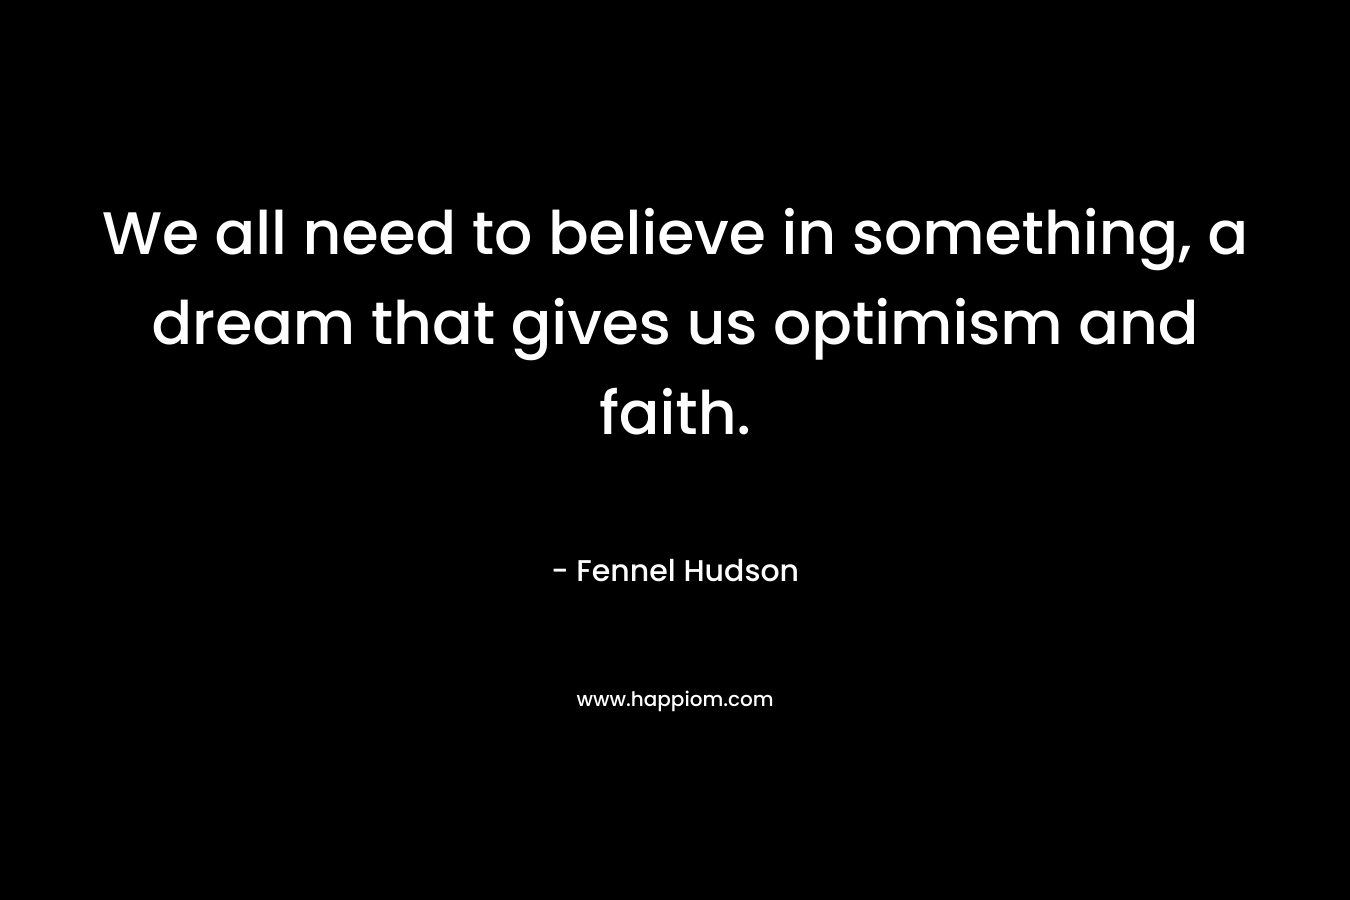 We all need to believe in something, a dream that gives us optimism and faith. – Fennel Hudson